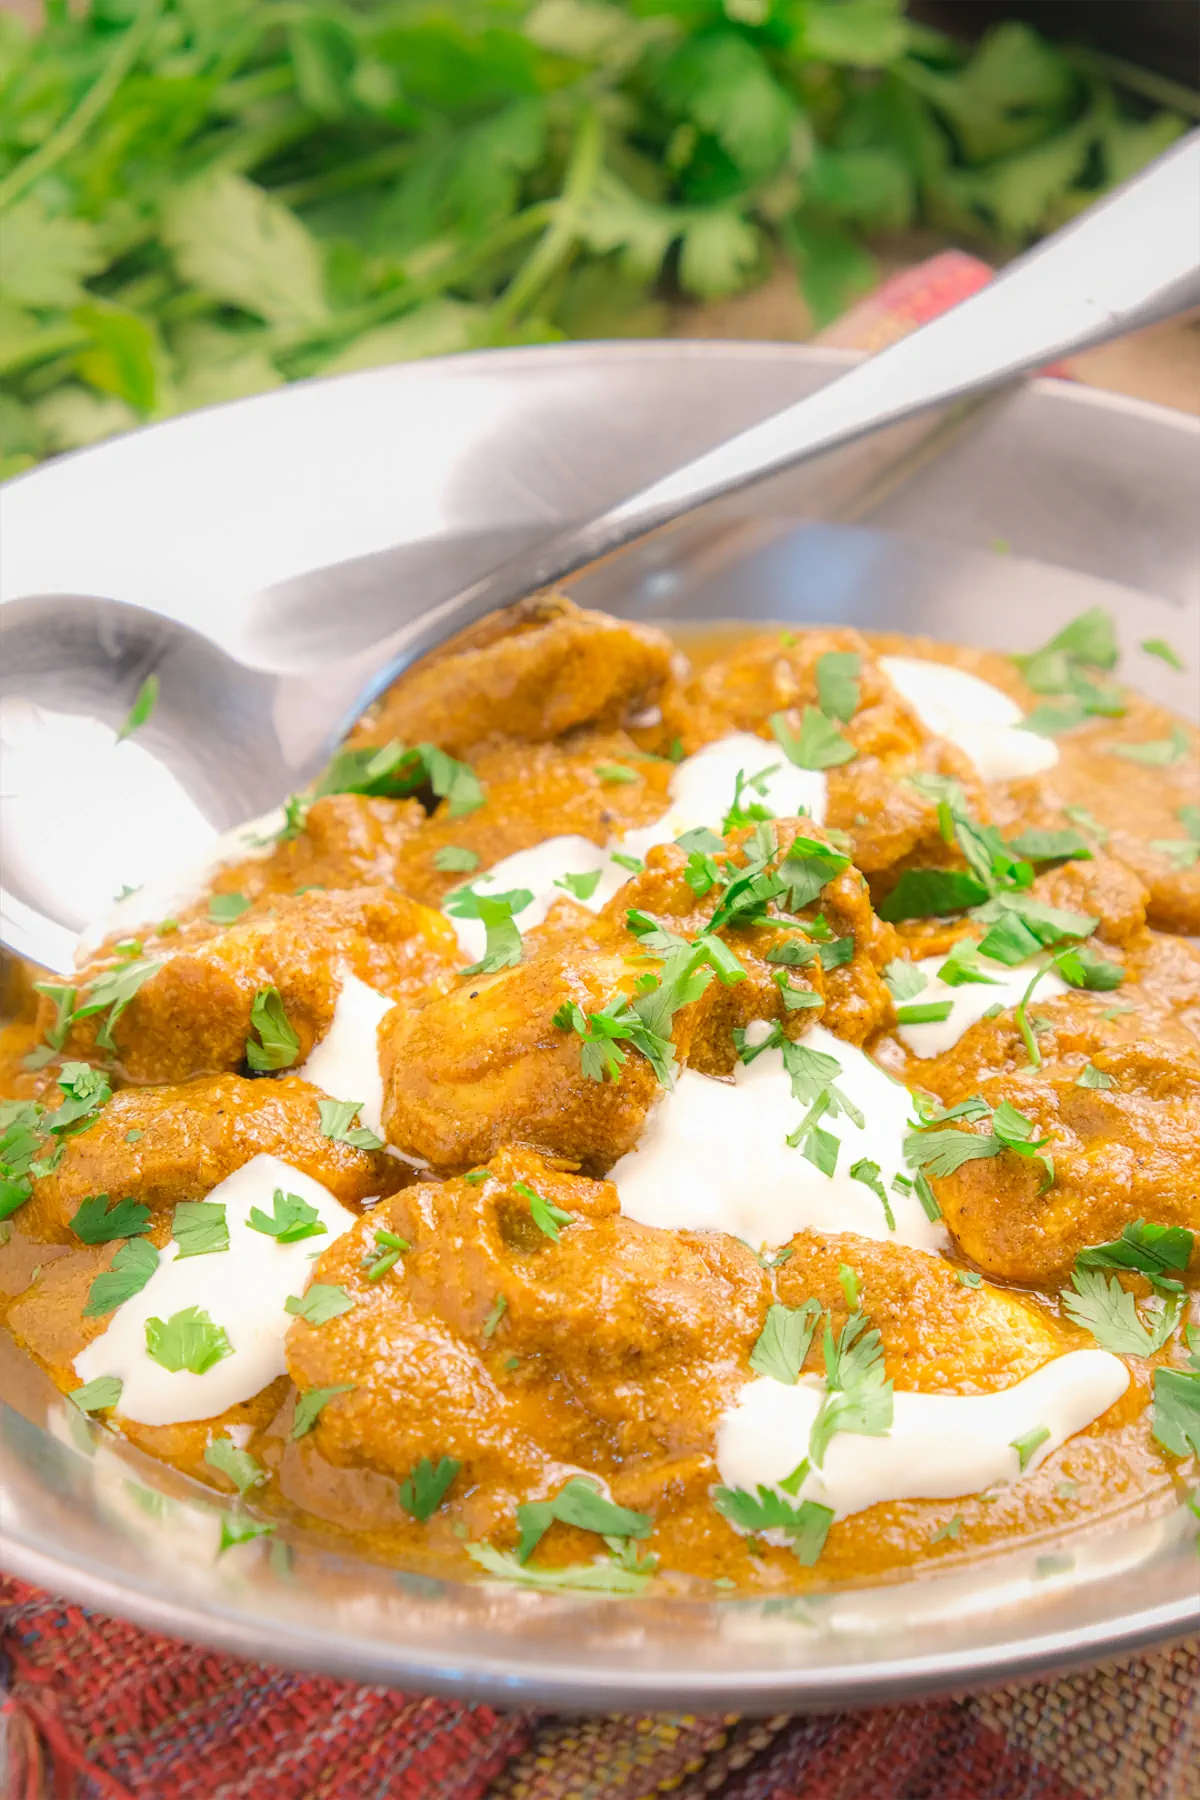 Keto Indian butter chicken, garnished with green herbs, served in a dish and a serving spoon.